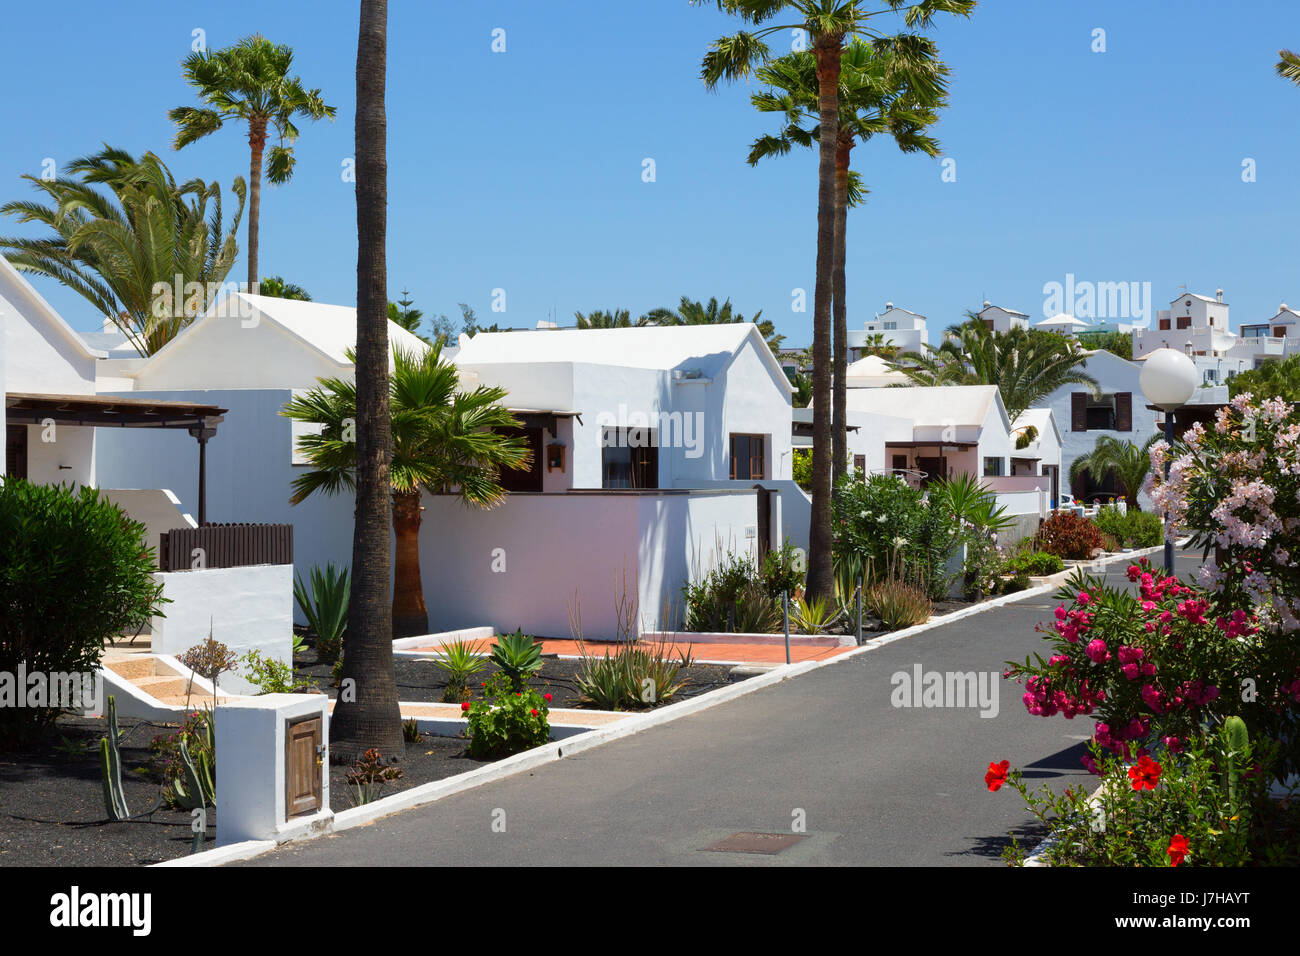 Holiday homes in Costa Teguise, Lanzarote, Canary Islands Europe Stock Photo